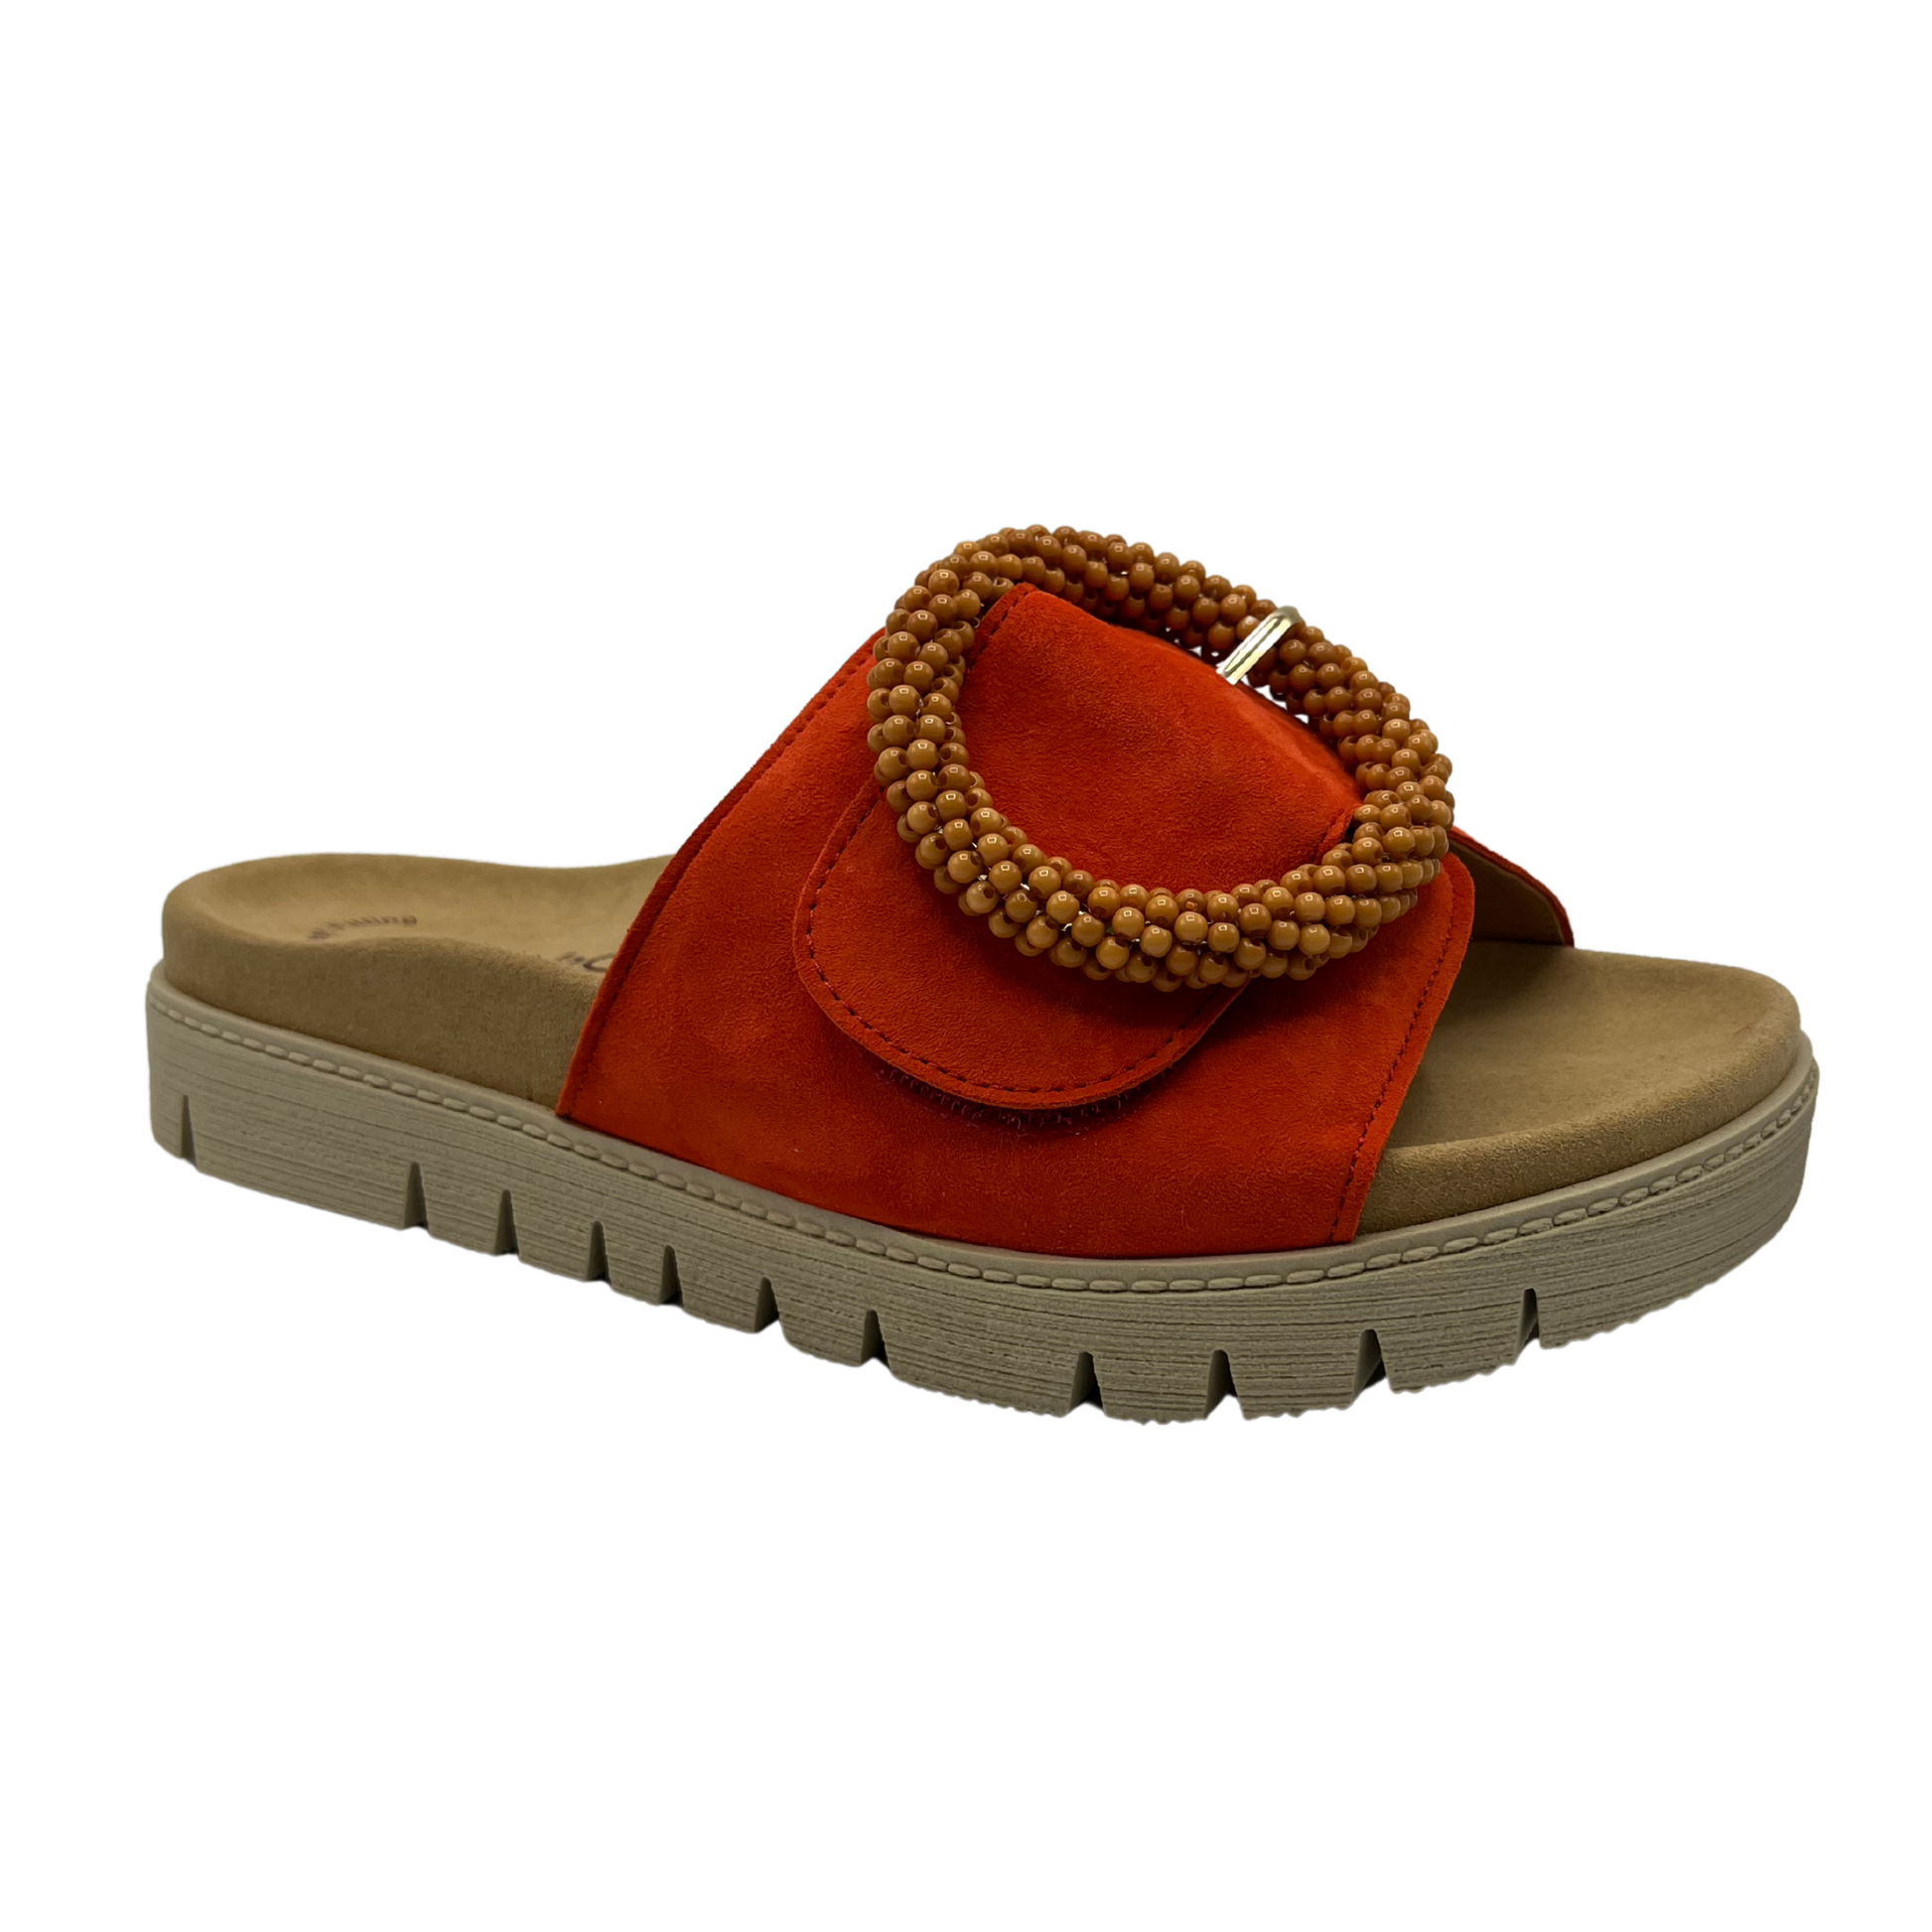 45 degree angled view of orange suede slide with large buckle detail and anatomical footbed